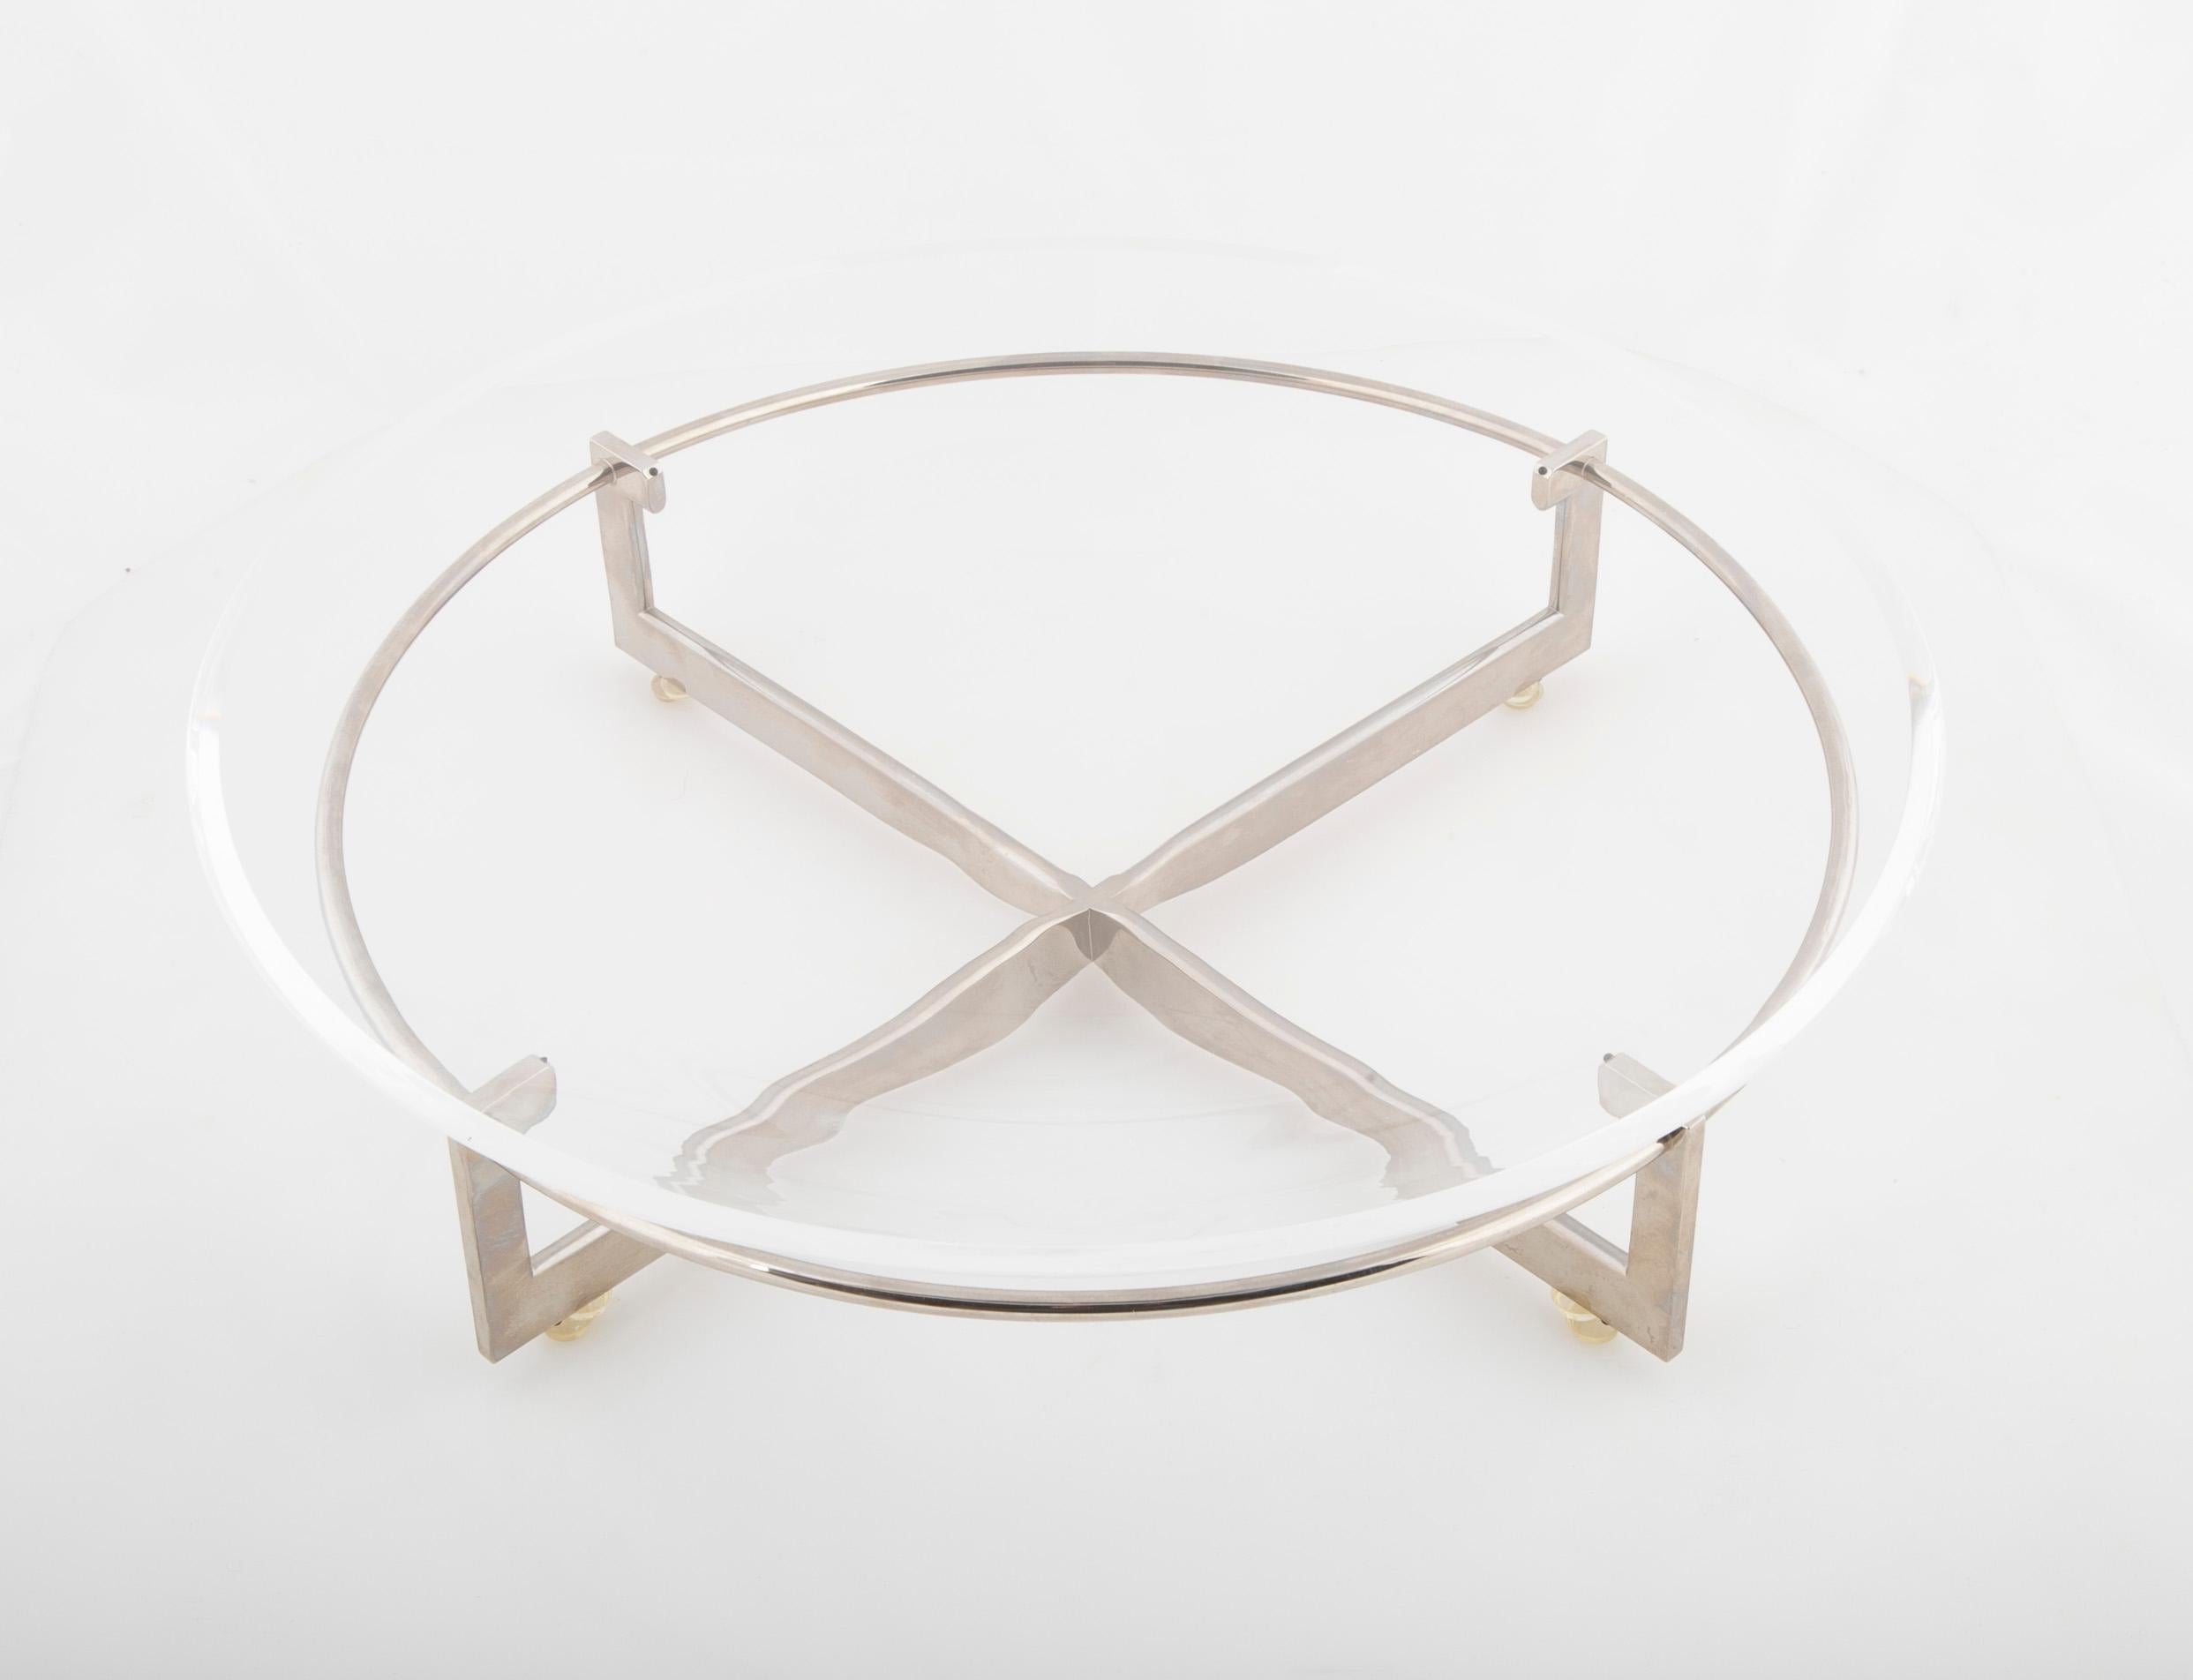 A glass bowl on stand produced by Steuben, circa 2000. Designed in 1994 by Richard Meier.